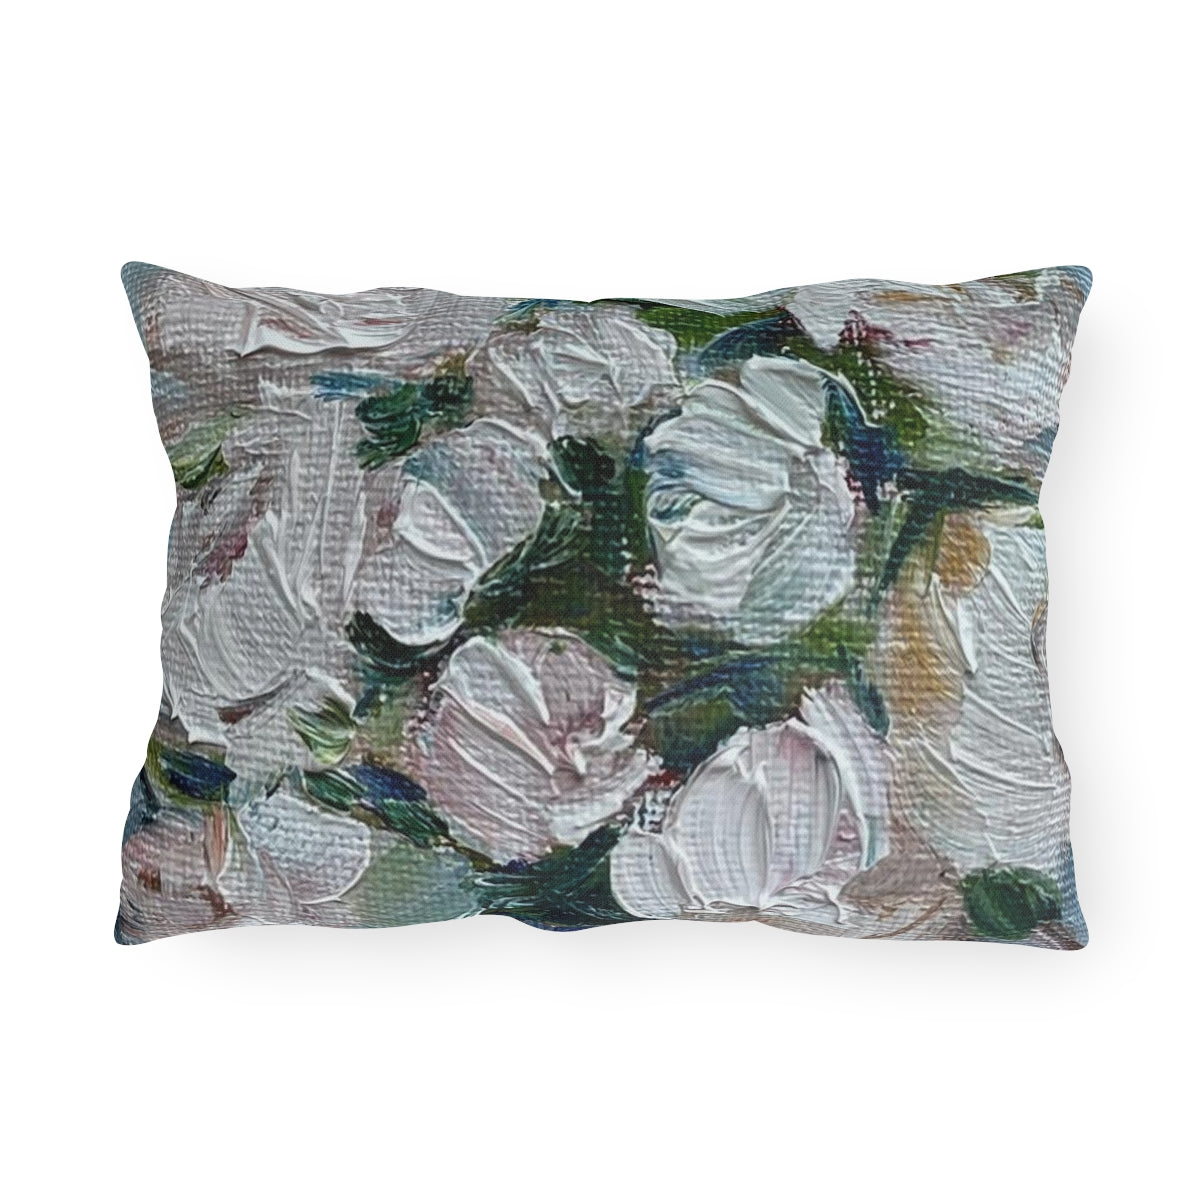 White Peonies in a Basket Outdoor Pillows